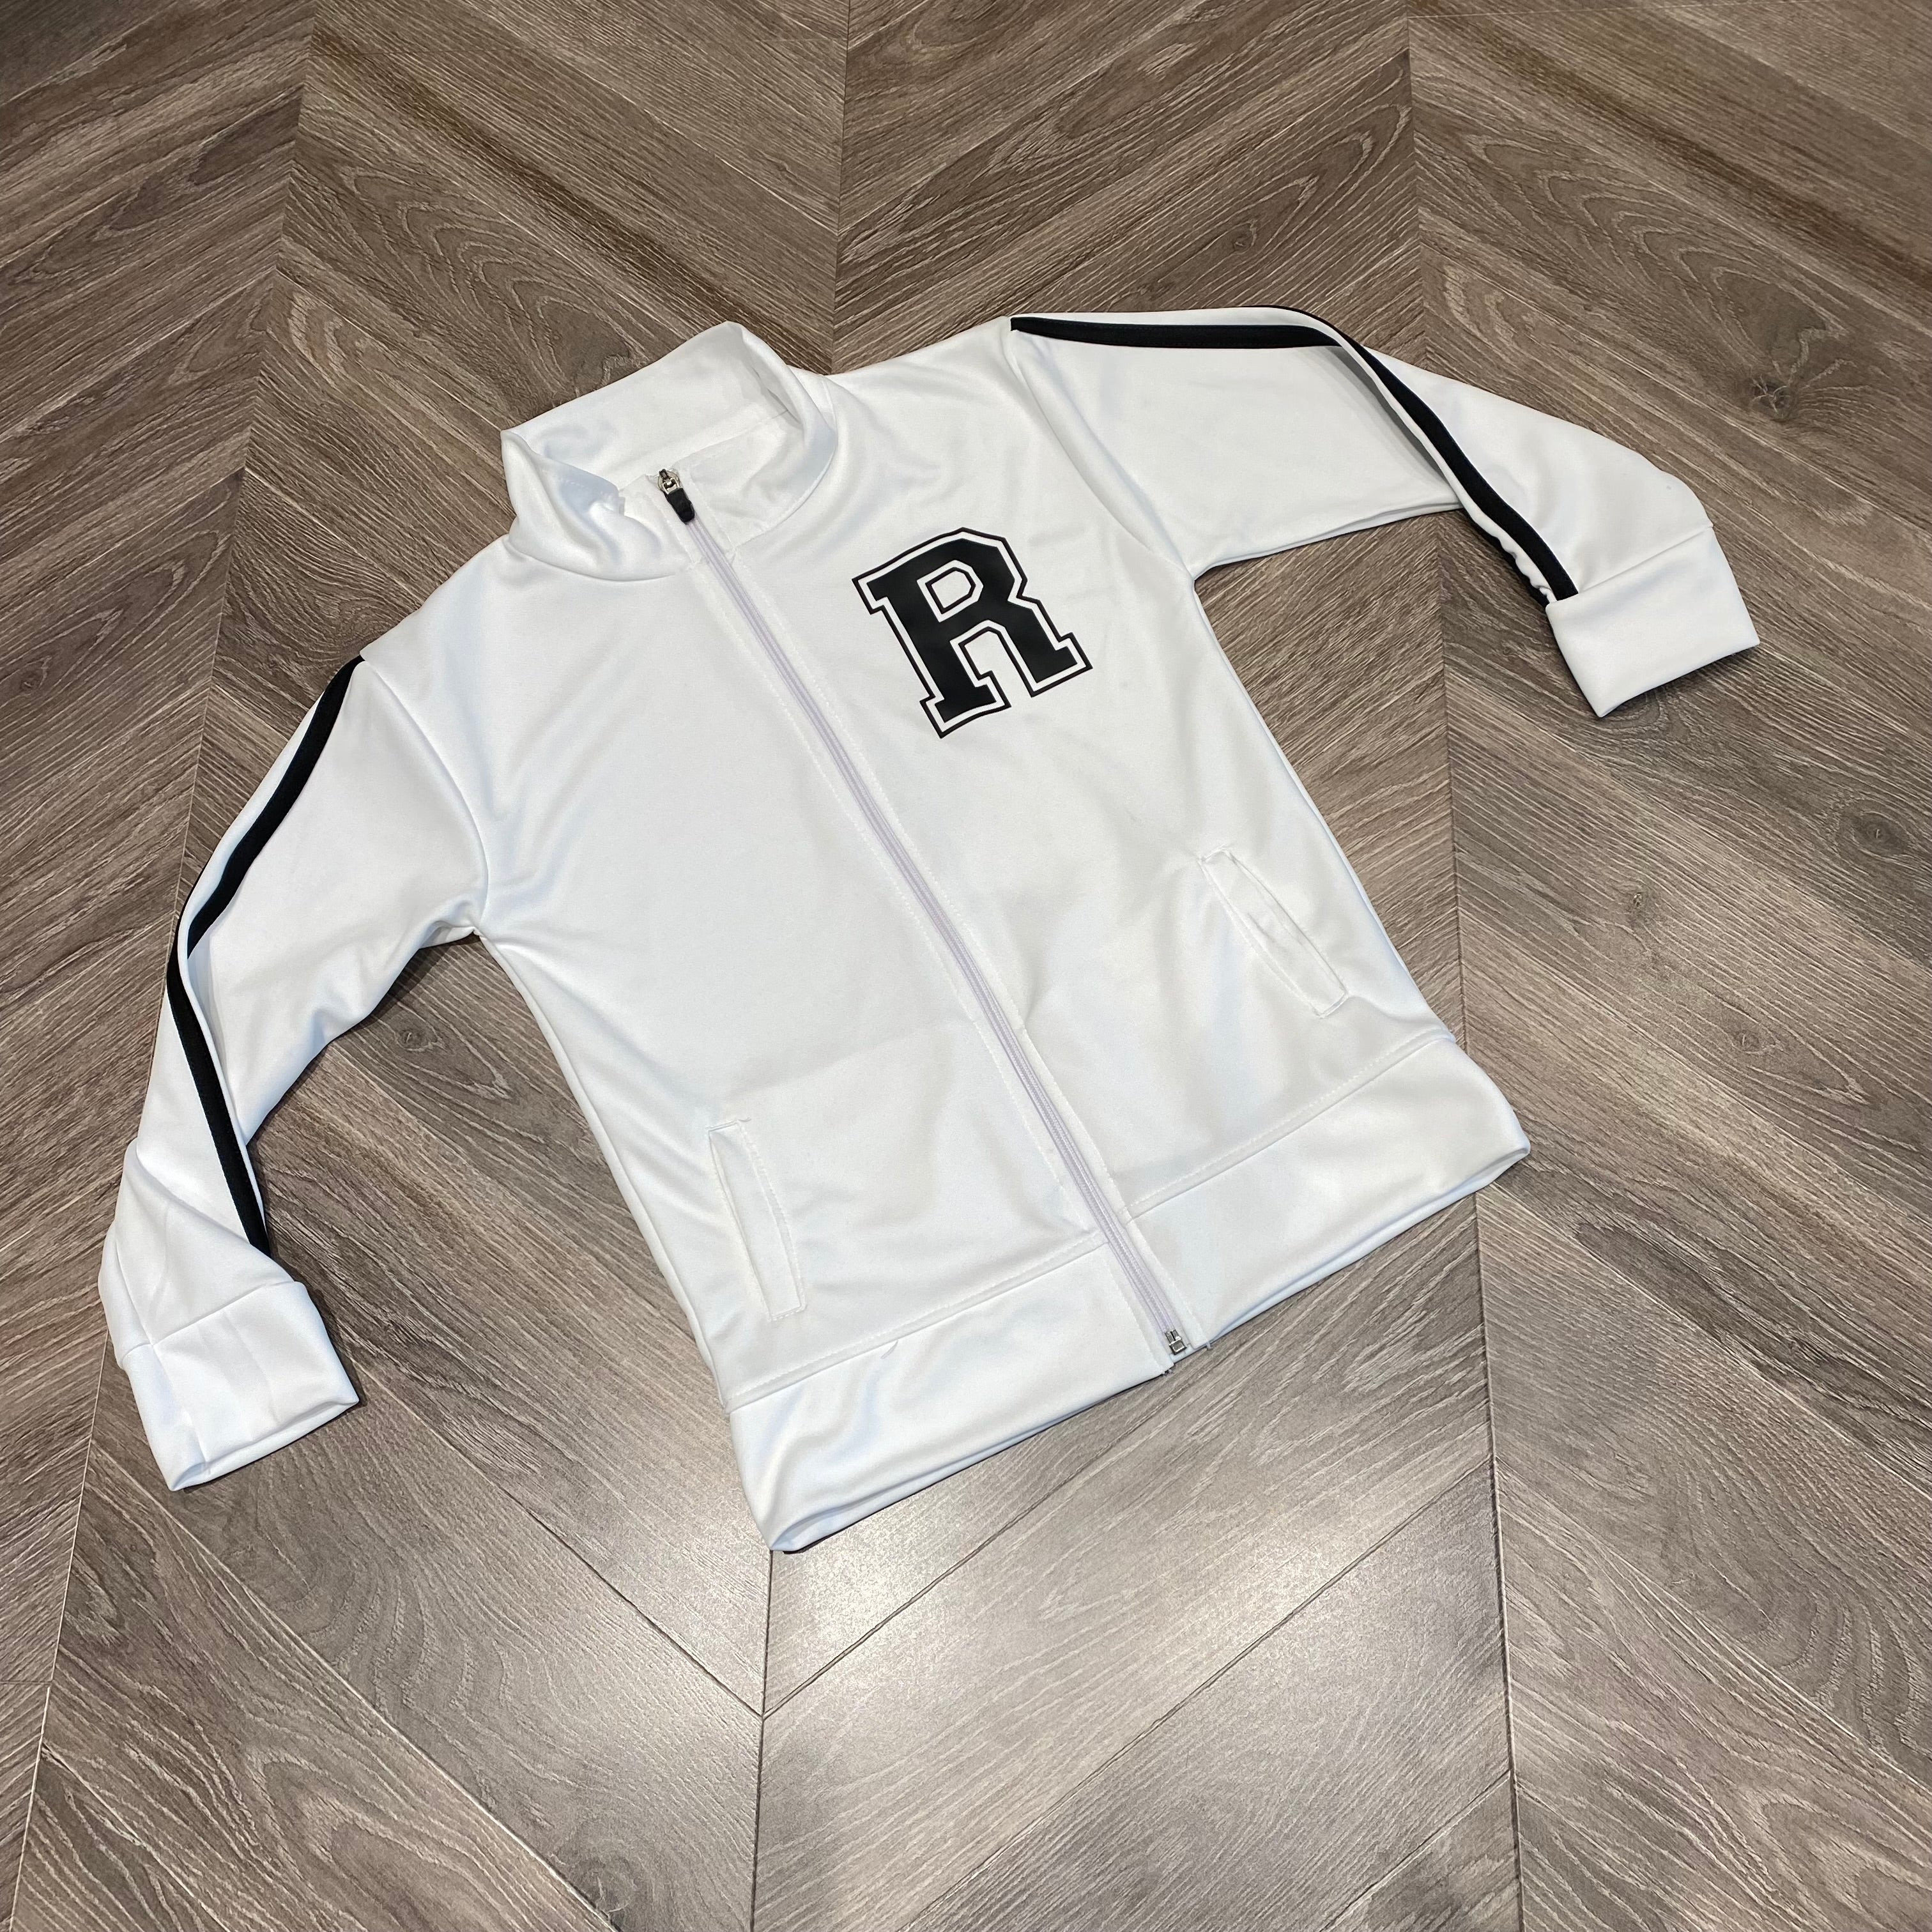 Monogram/Personalised Jersey Jackets (contact us for bulk orders)